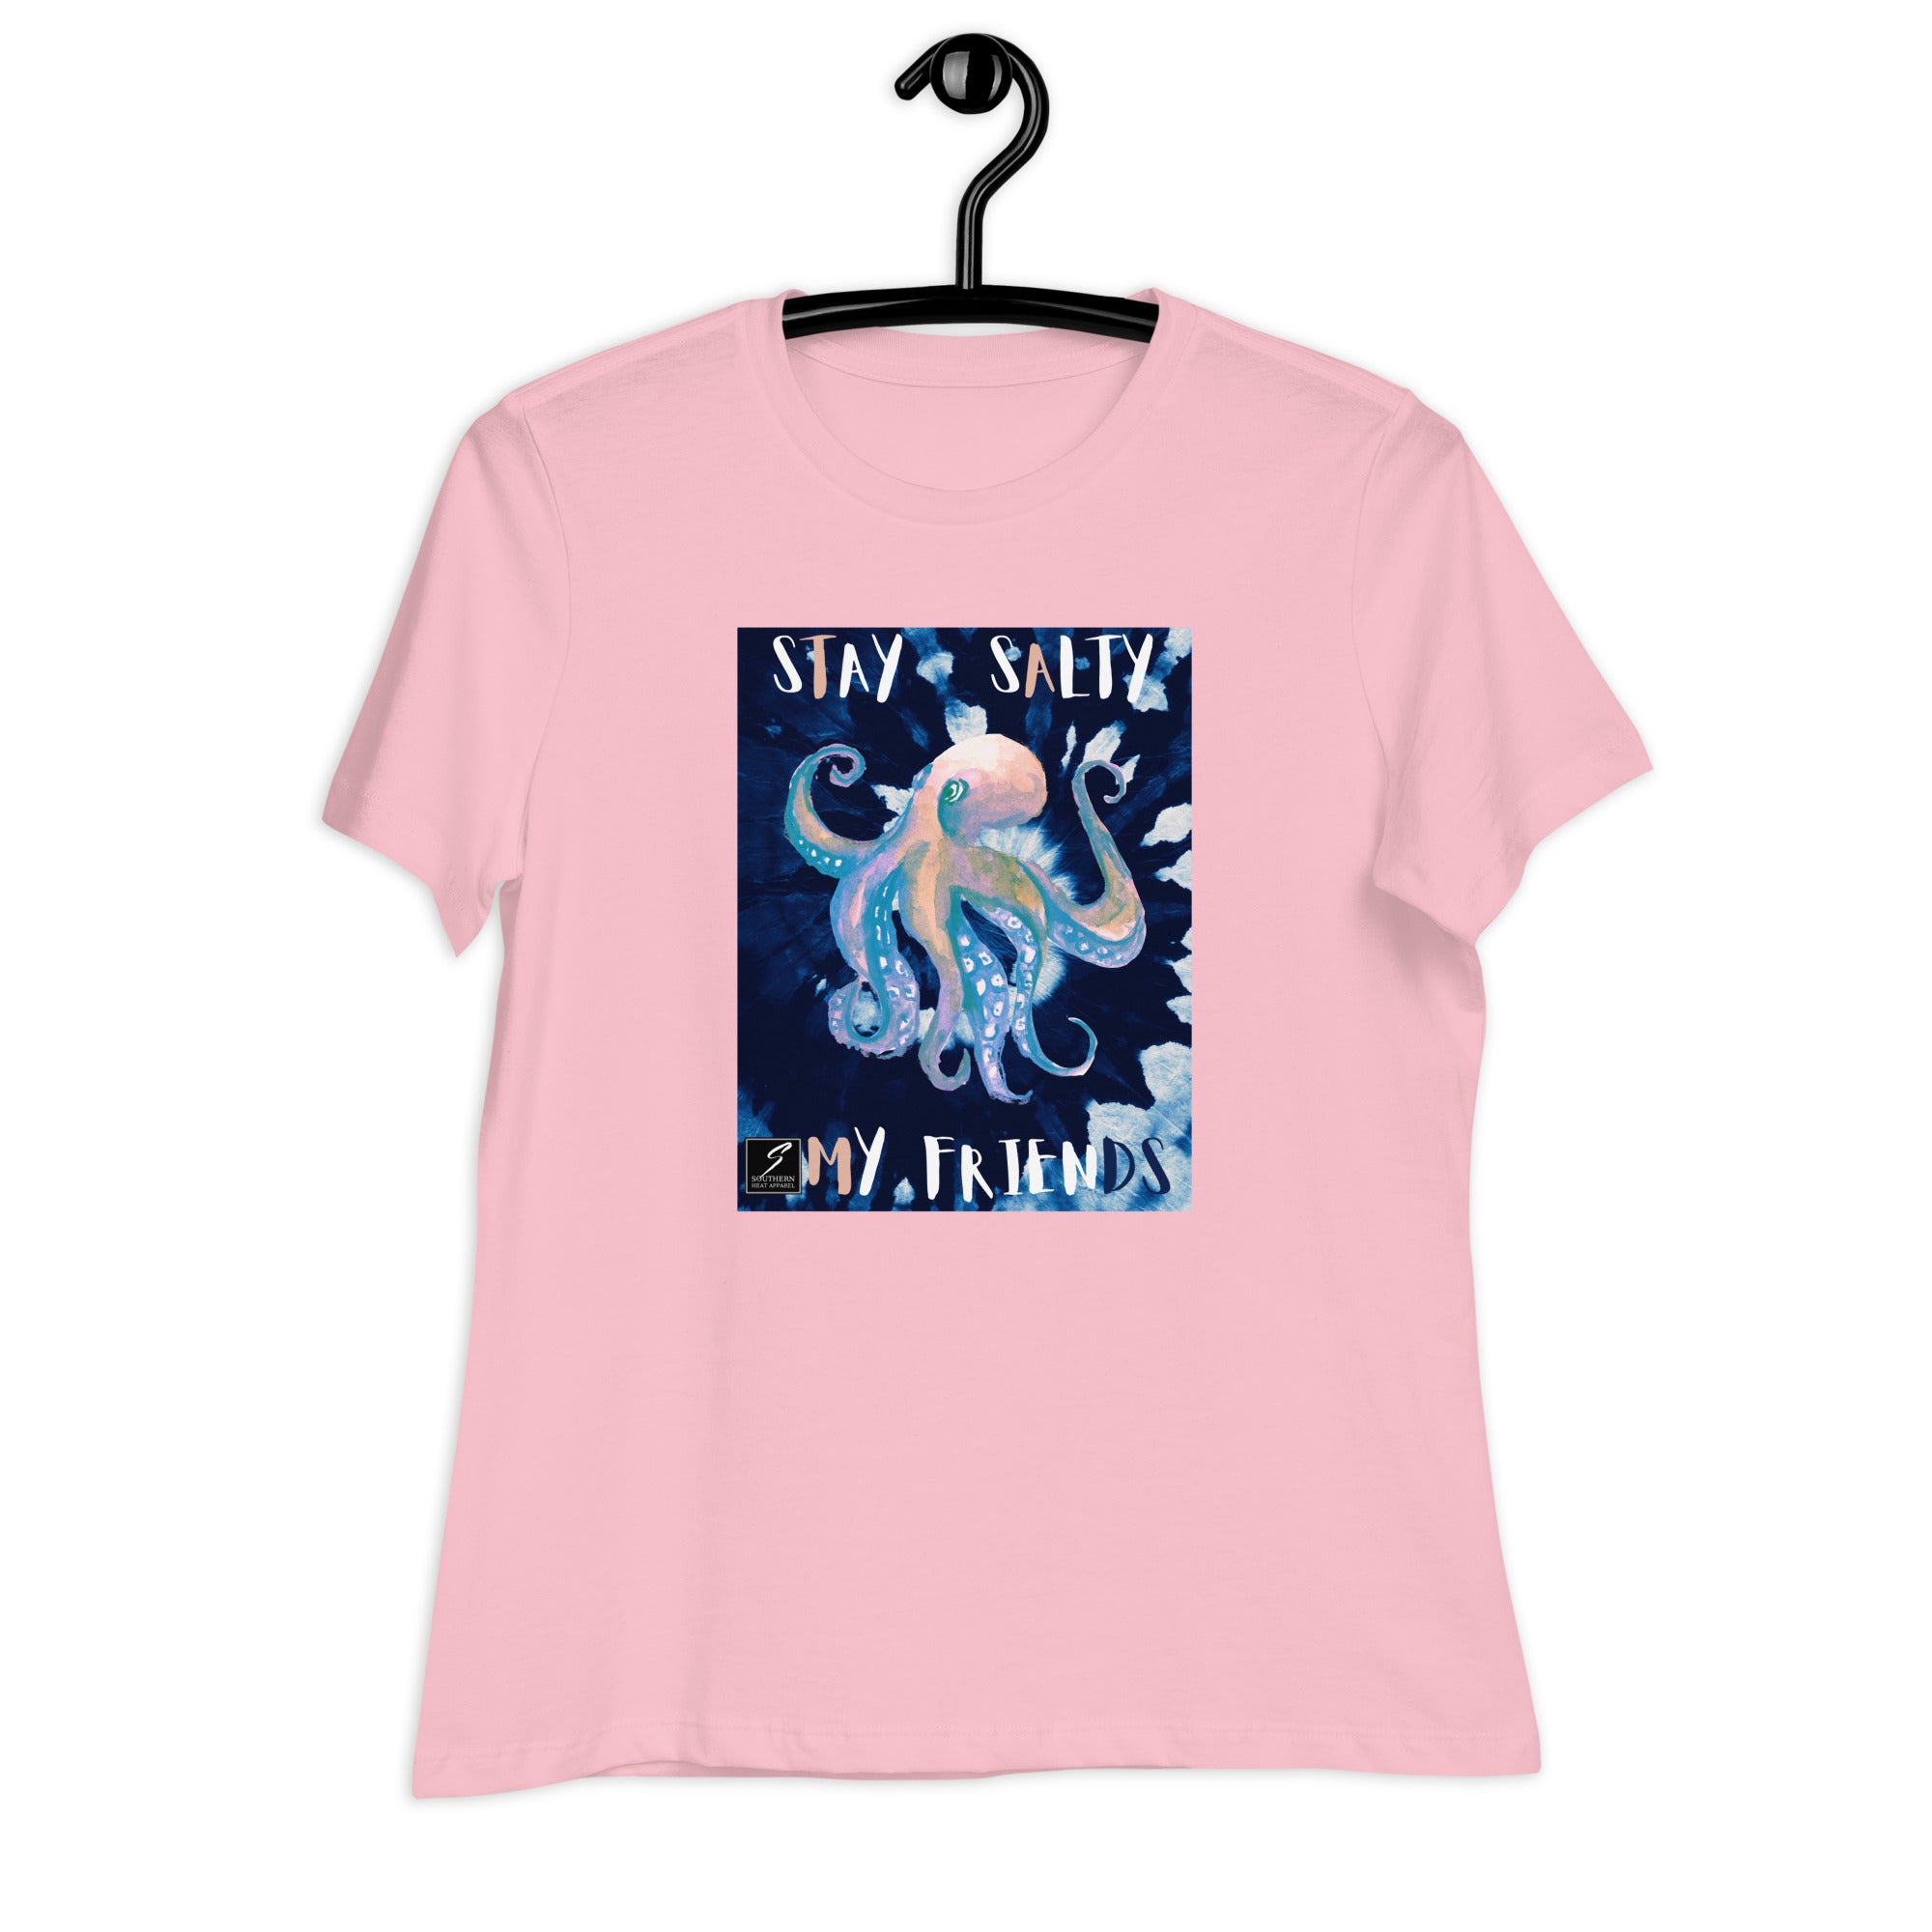 Stay salty-Women's Relaxed T-Shirt